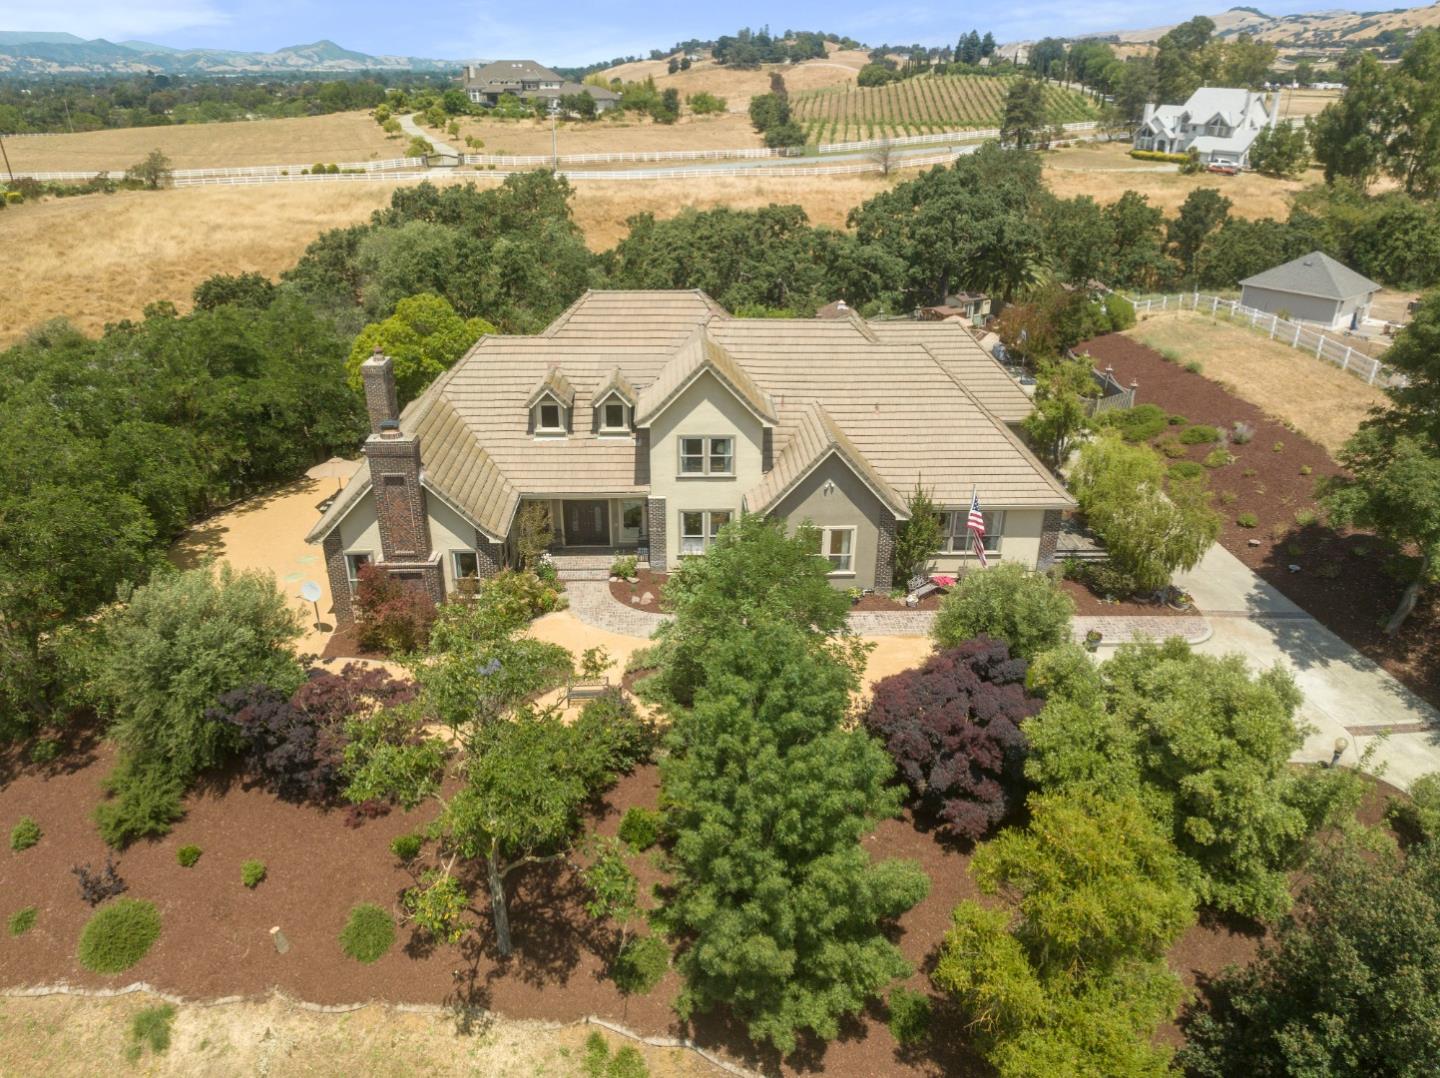 Photo of 3003 Val Ct in Gilroy, CA